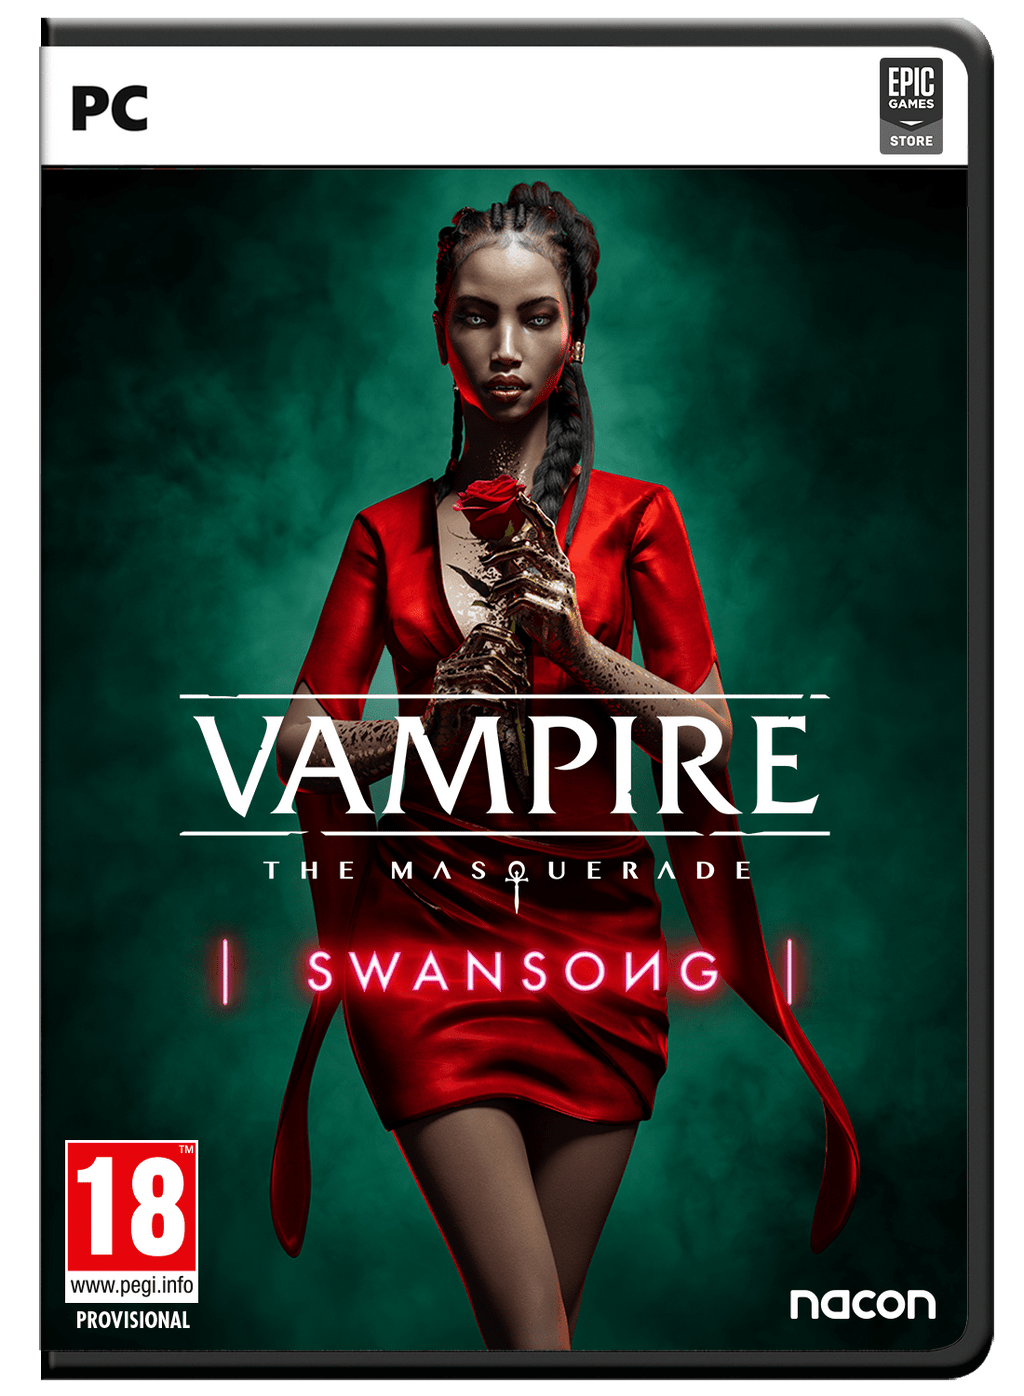 Vampire: The Masquerade – Swansong | Download and Buy Today - Epic Games  Store